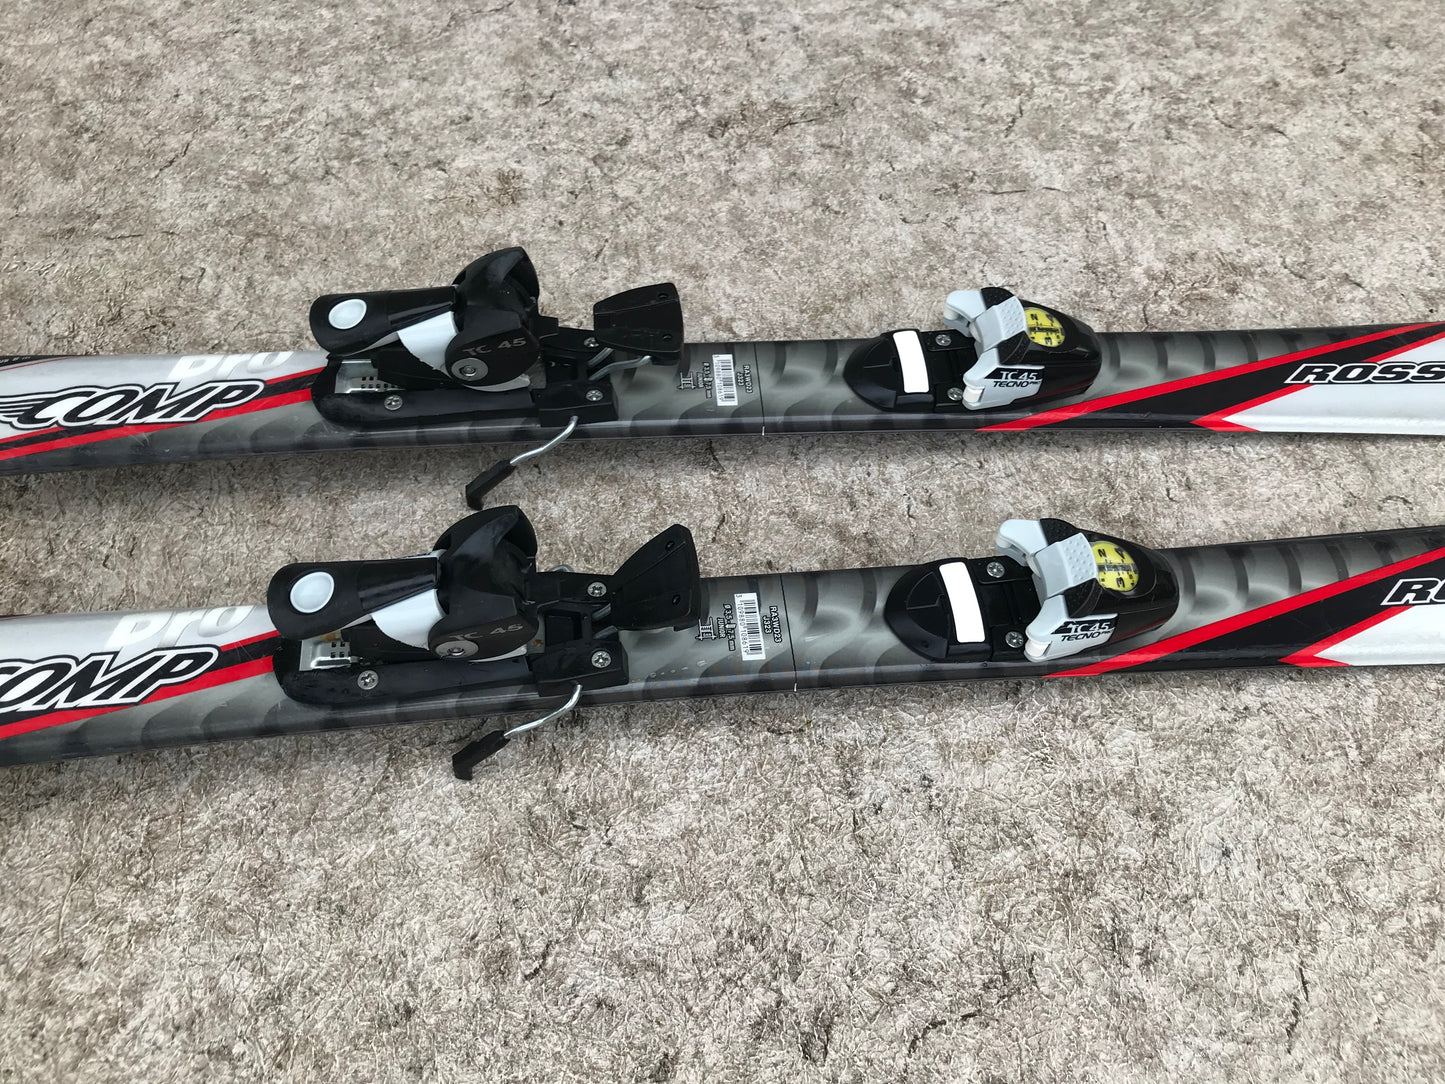 Ski 100 Rossignol Black Silver Red Parabolic With Bindings